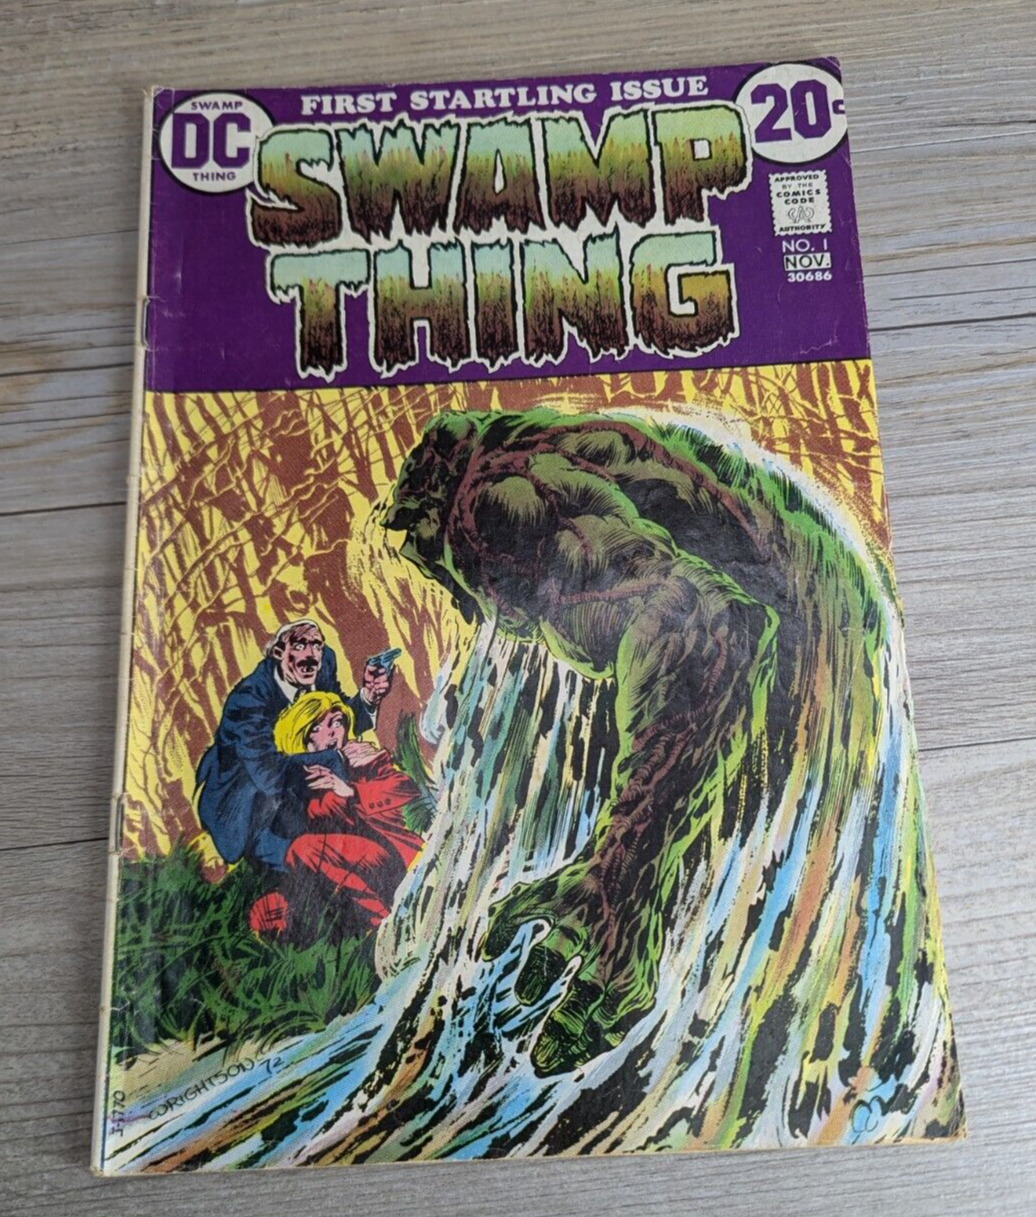 Swamp Thing #1 1st Appearance Cut Page First Startling Issue Nov 1972 DC Comics